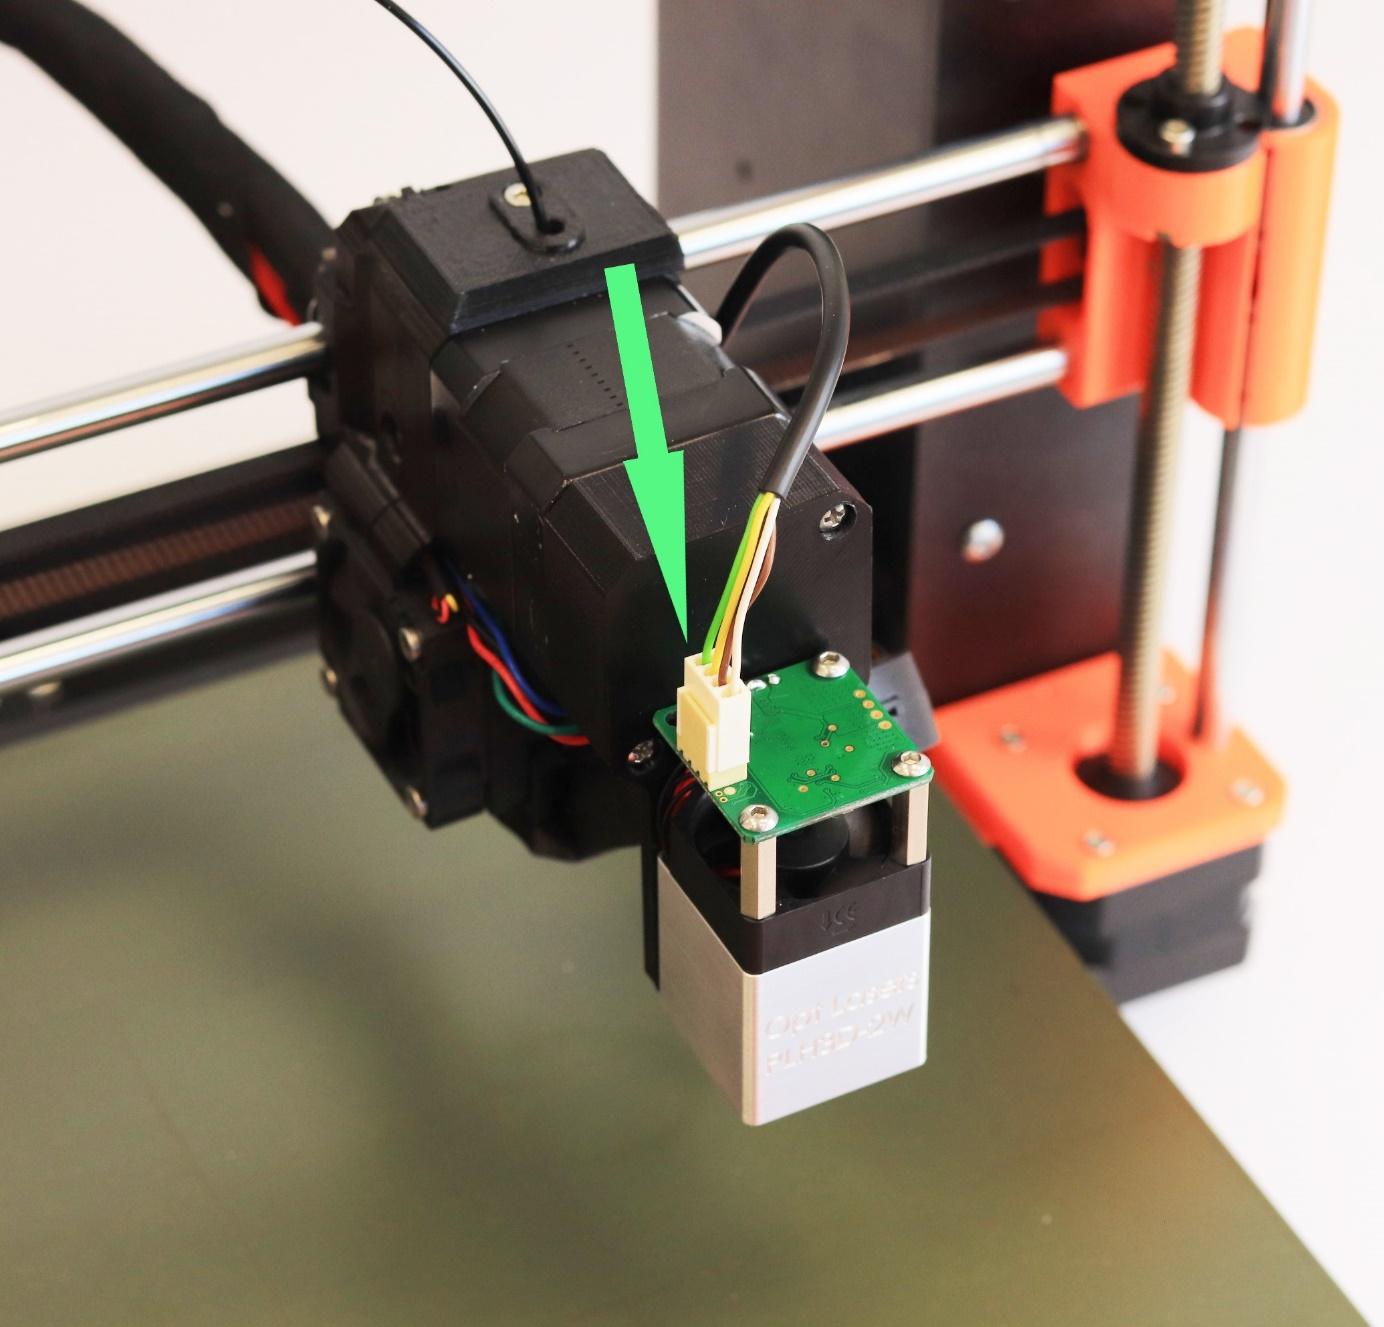 Connecting Laser to Prusa 3DP